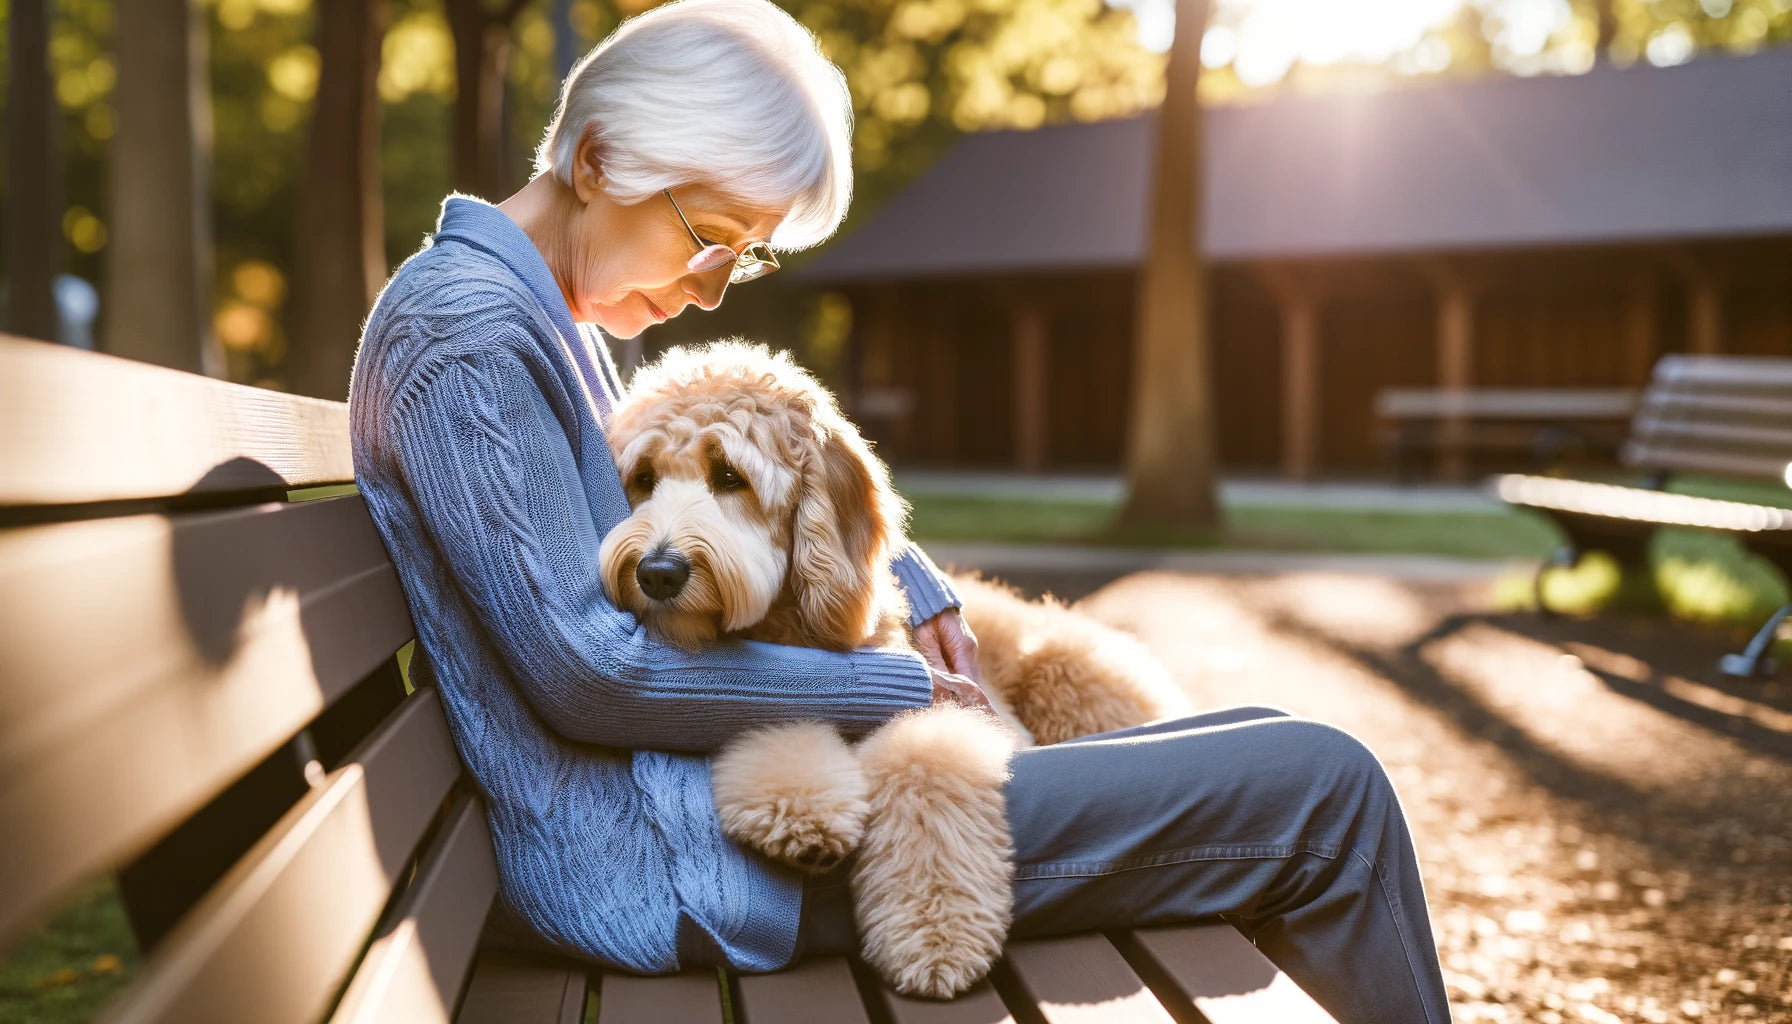 Mini Goldendoodle sitting closely beside a Baby Boomer on a bench, offering comfort with its head on their lap during a reflective moment.